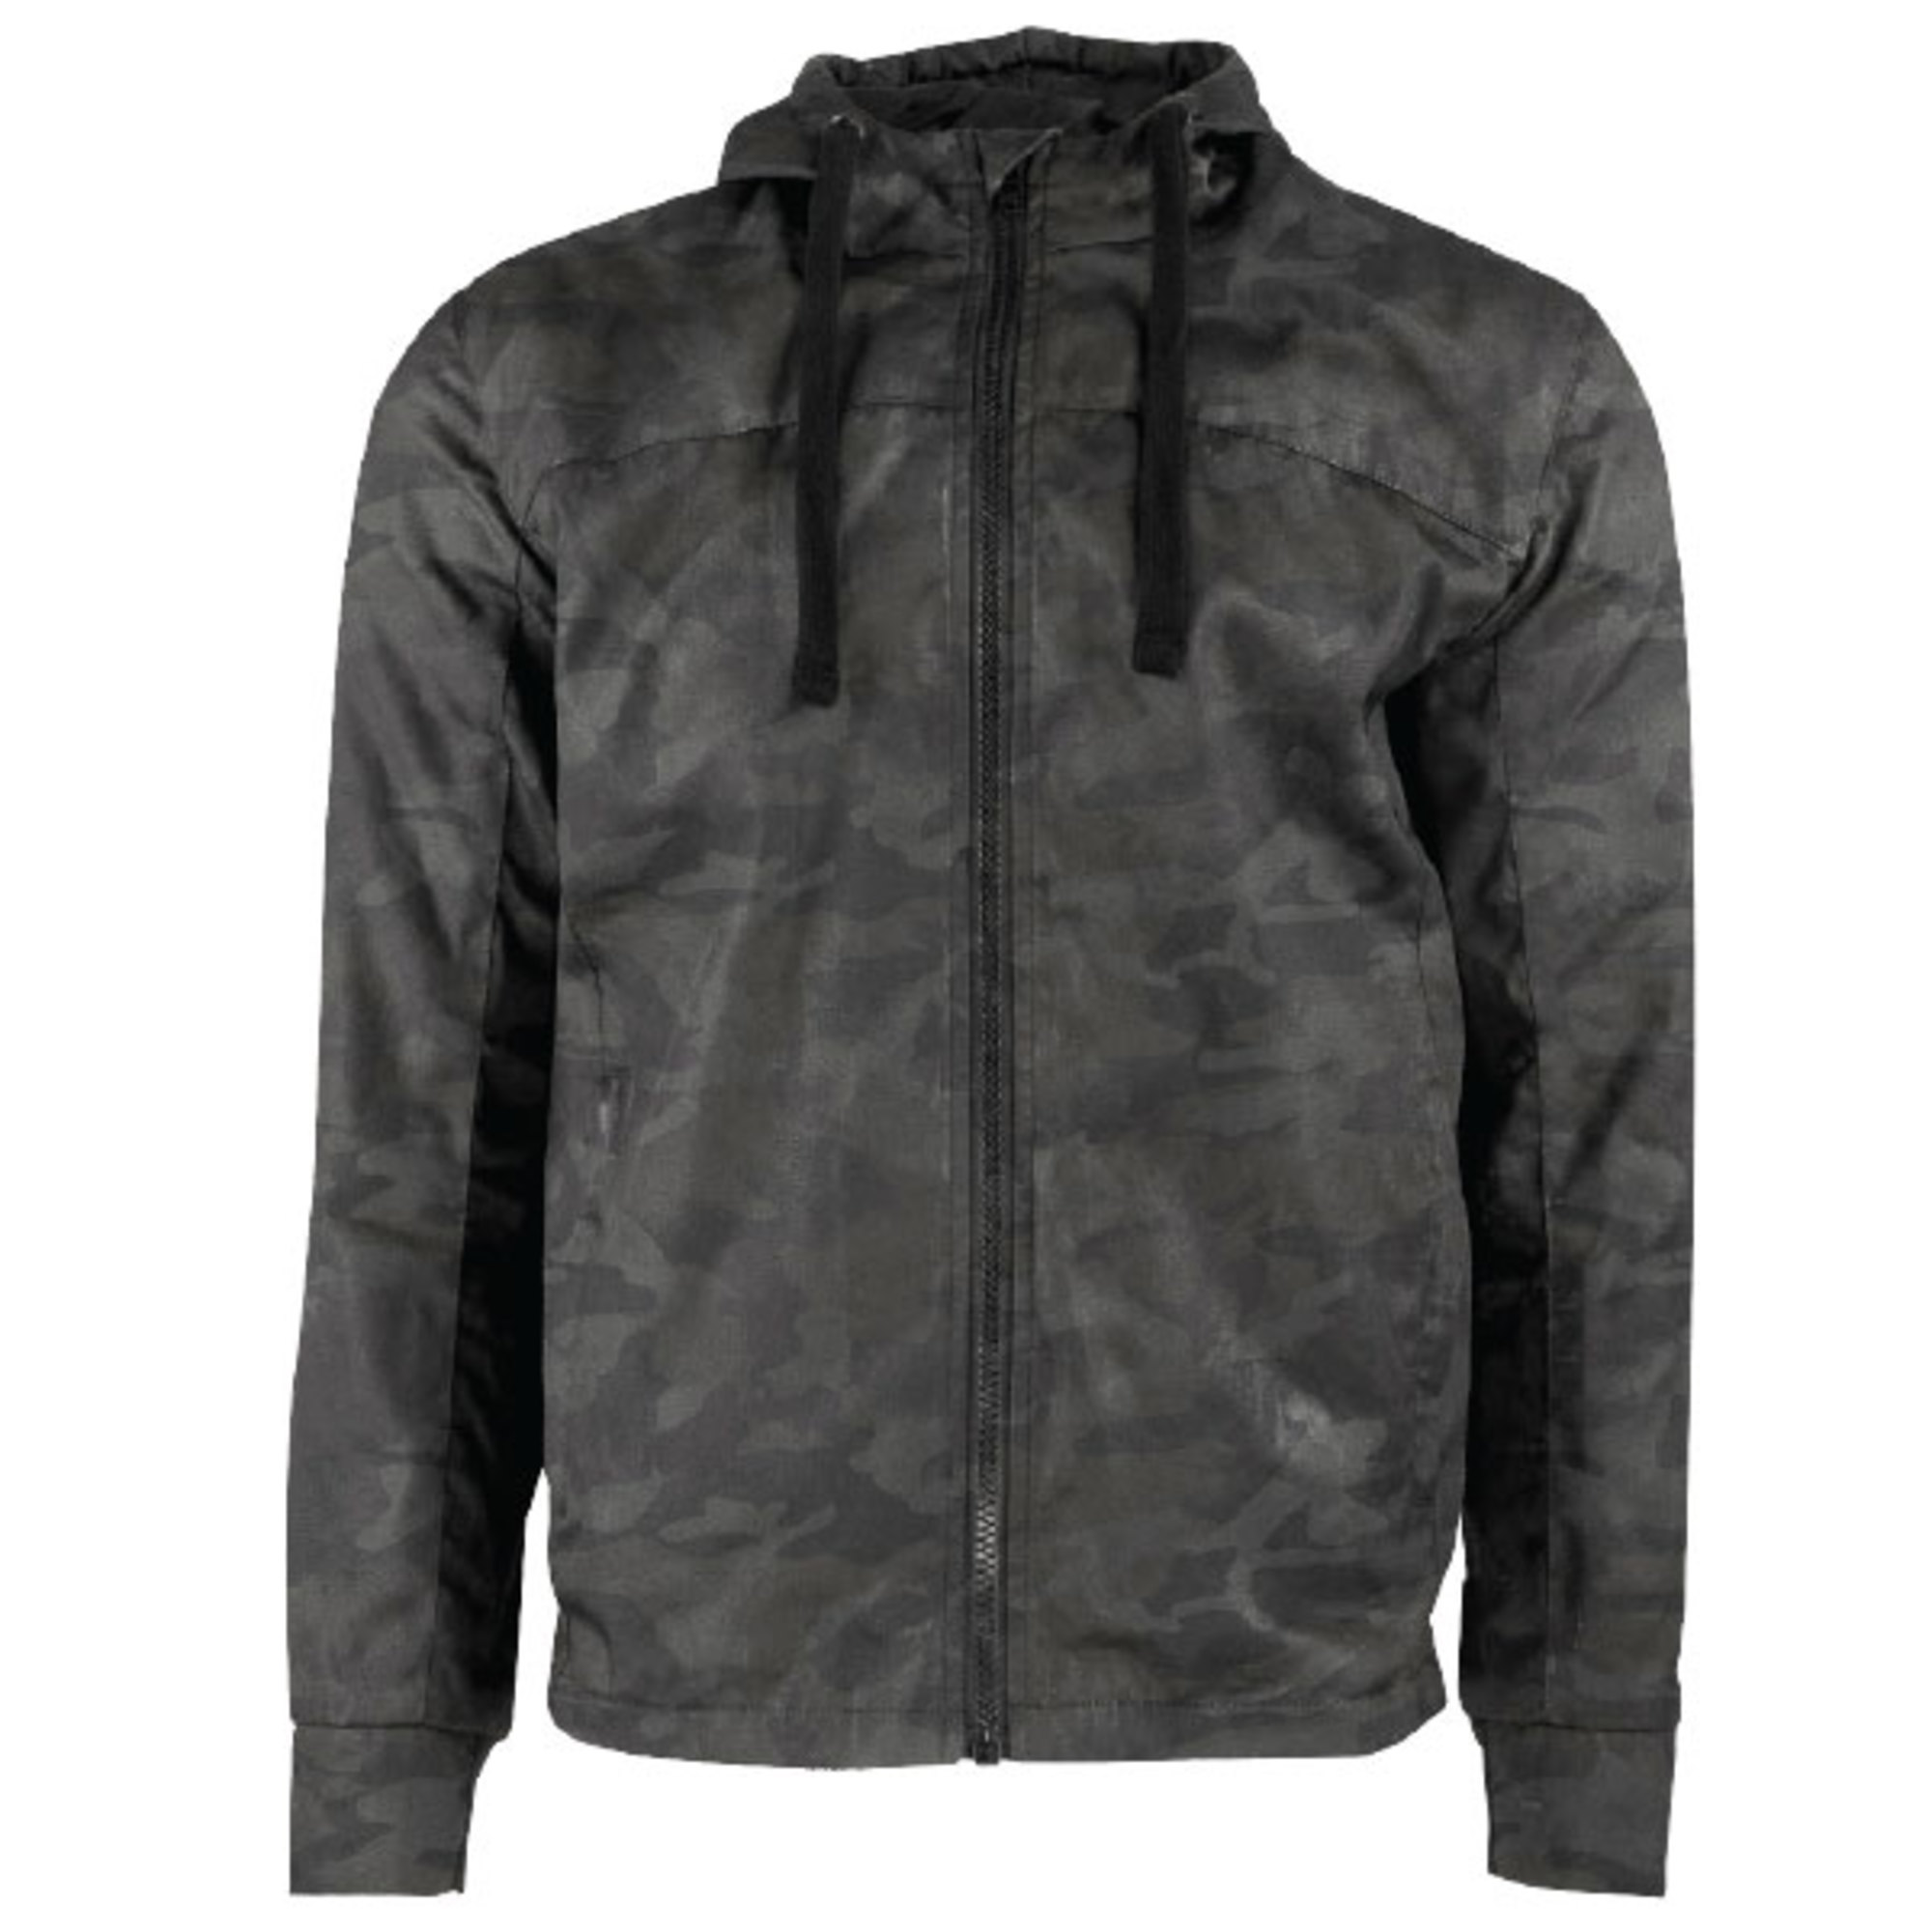 speed and strength textile jackets for men go broke armoured hoody